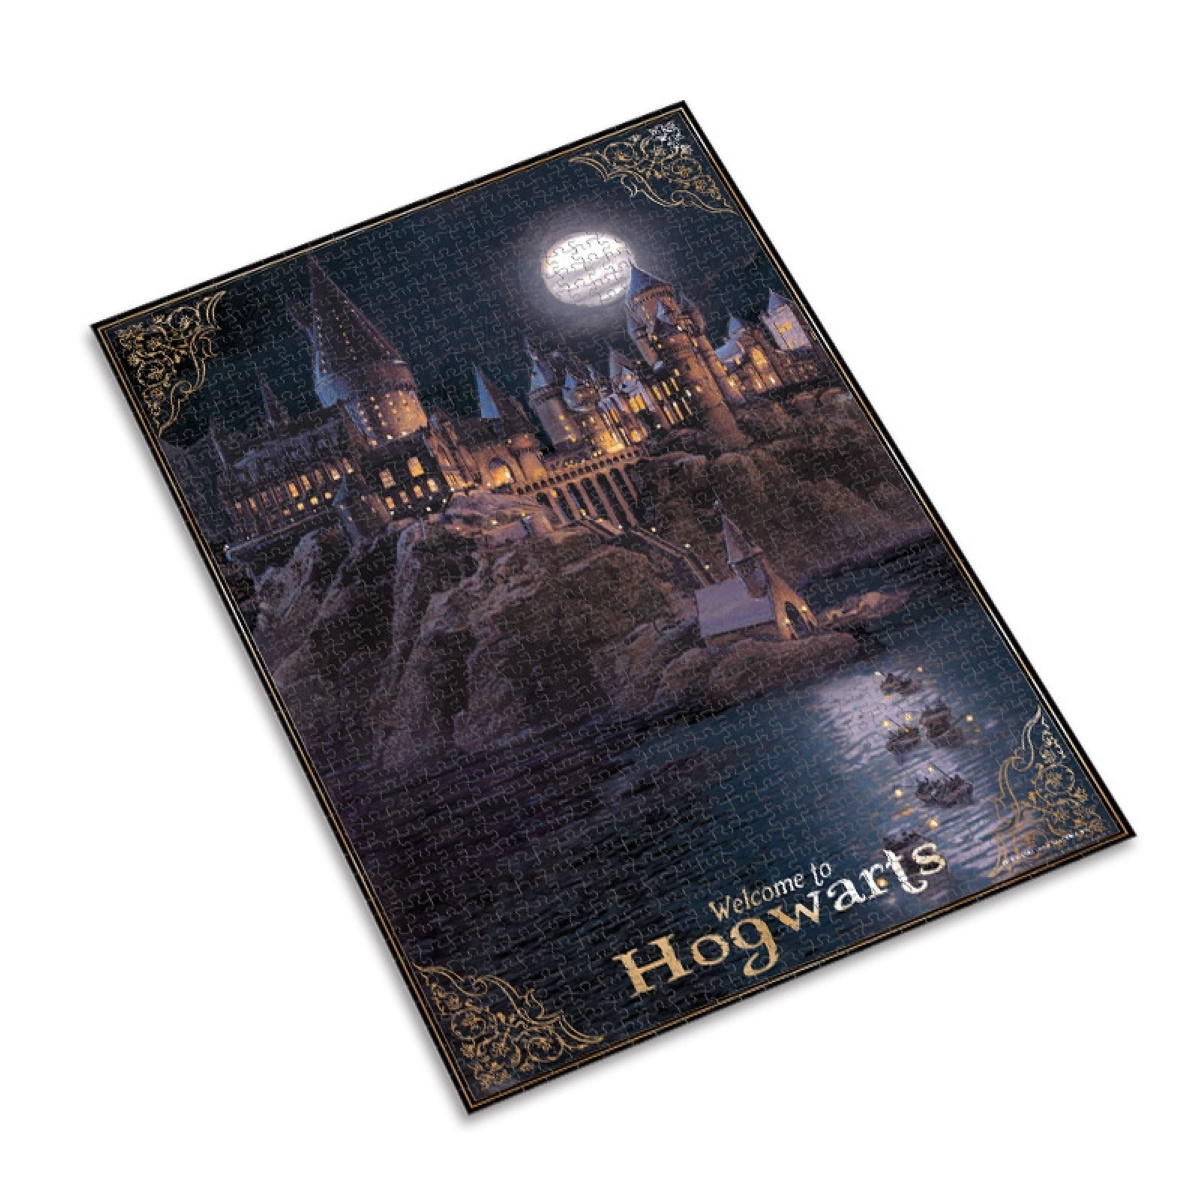 ABYSTYLE Hogwarts Schloss Teile Puzzle Puzzle 1000